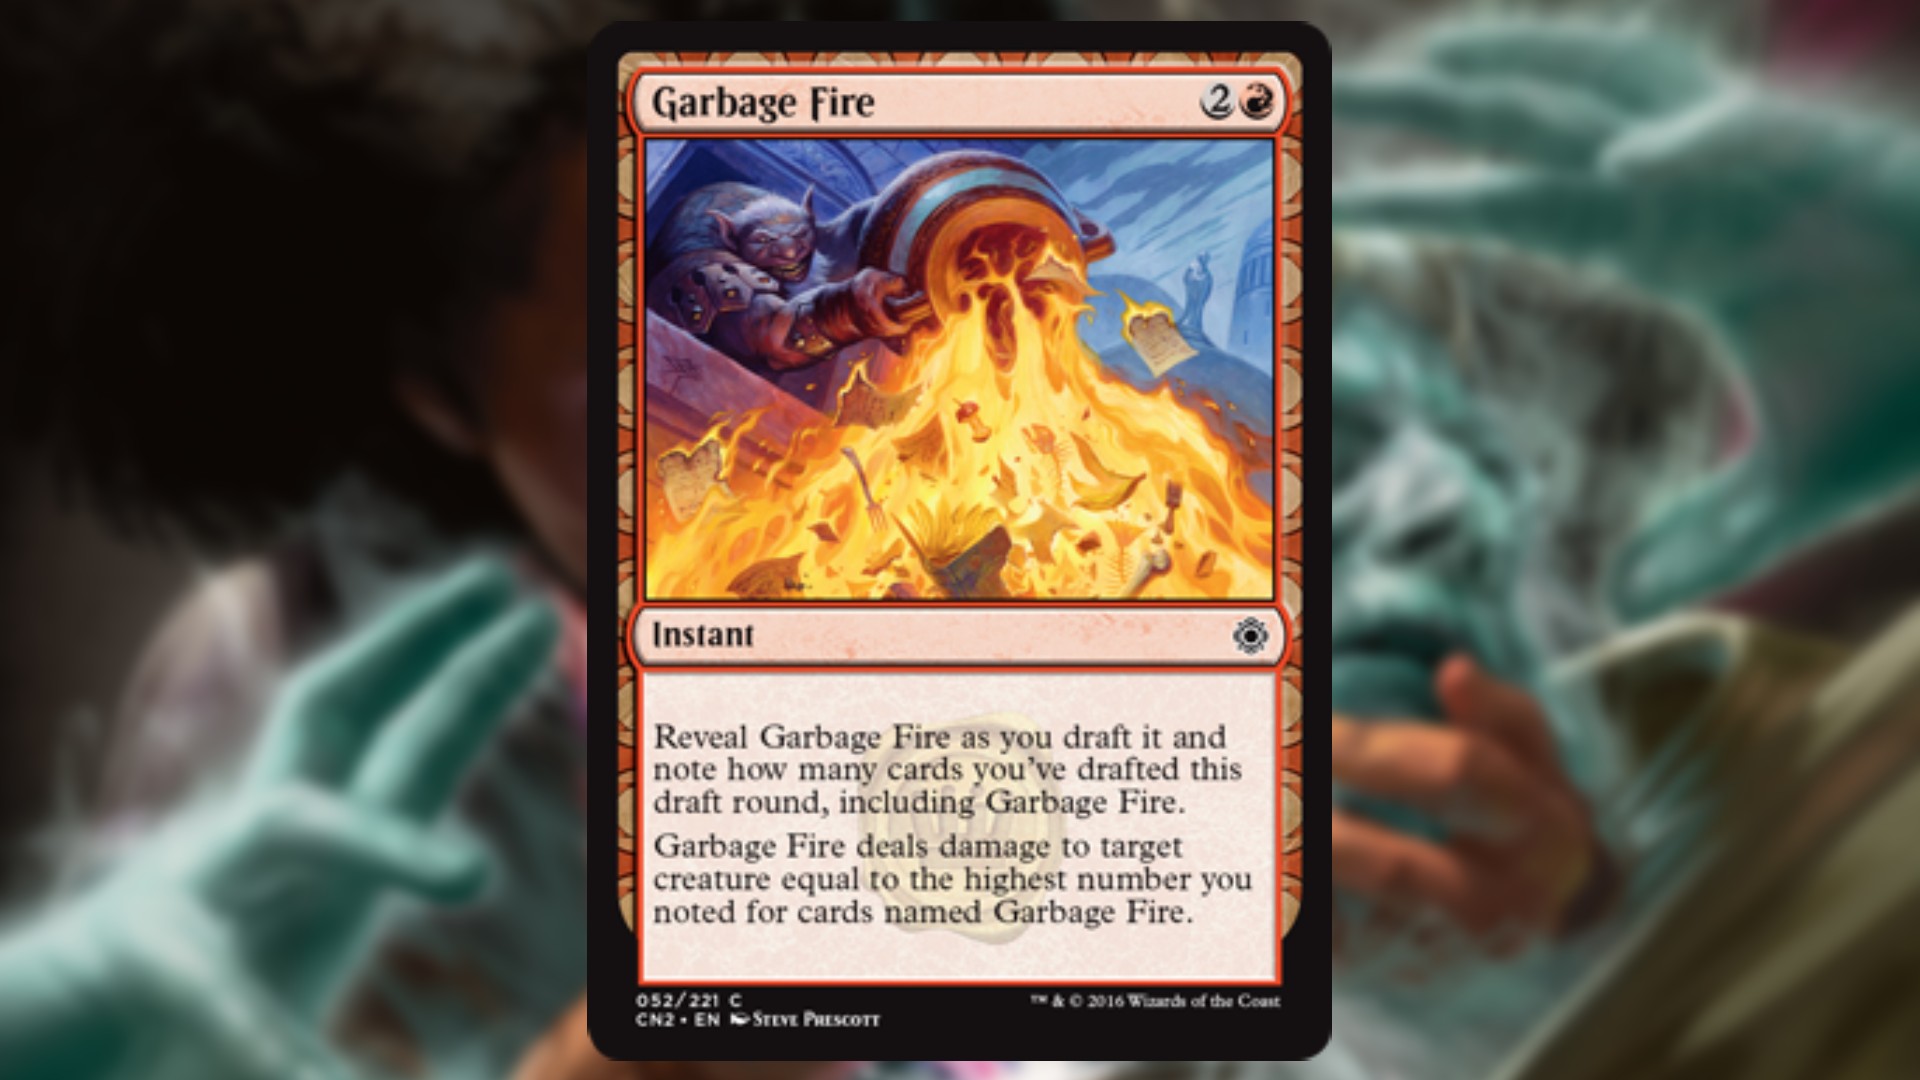 magic the gathering card in red with art showing a goblin like creature pouring fire onto the viewer